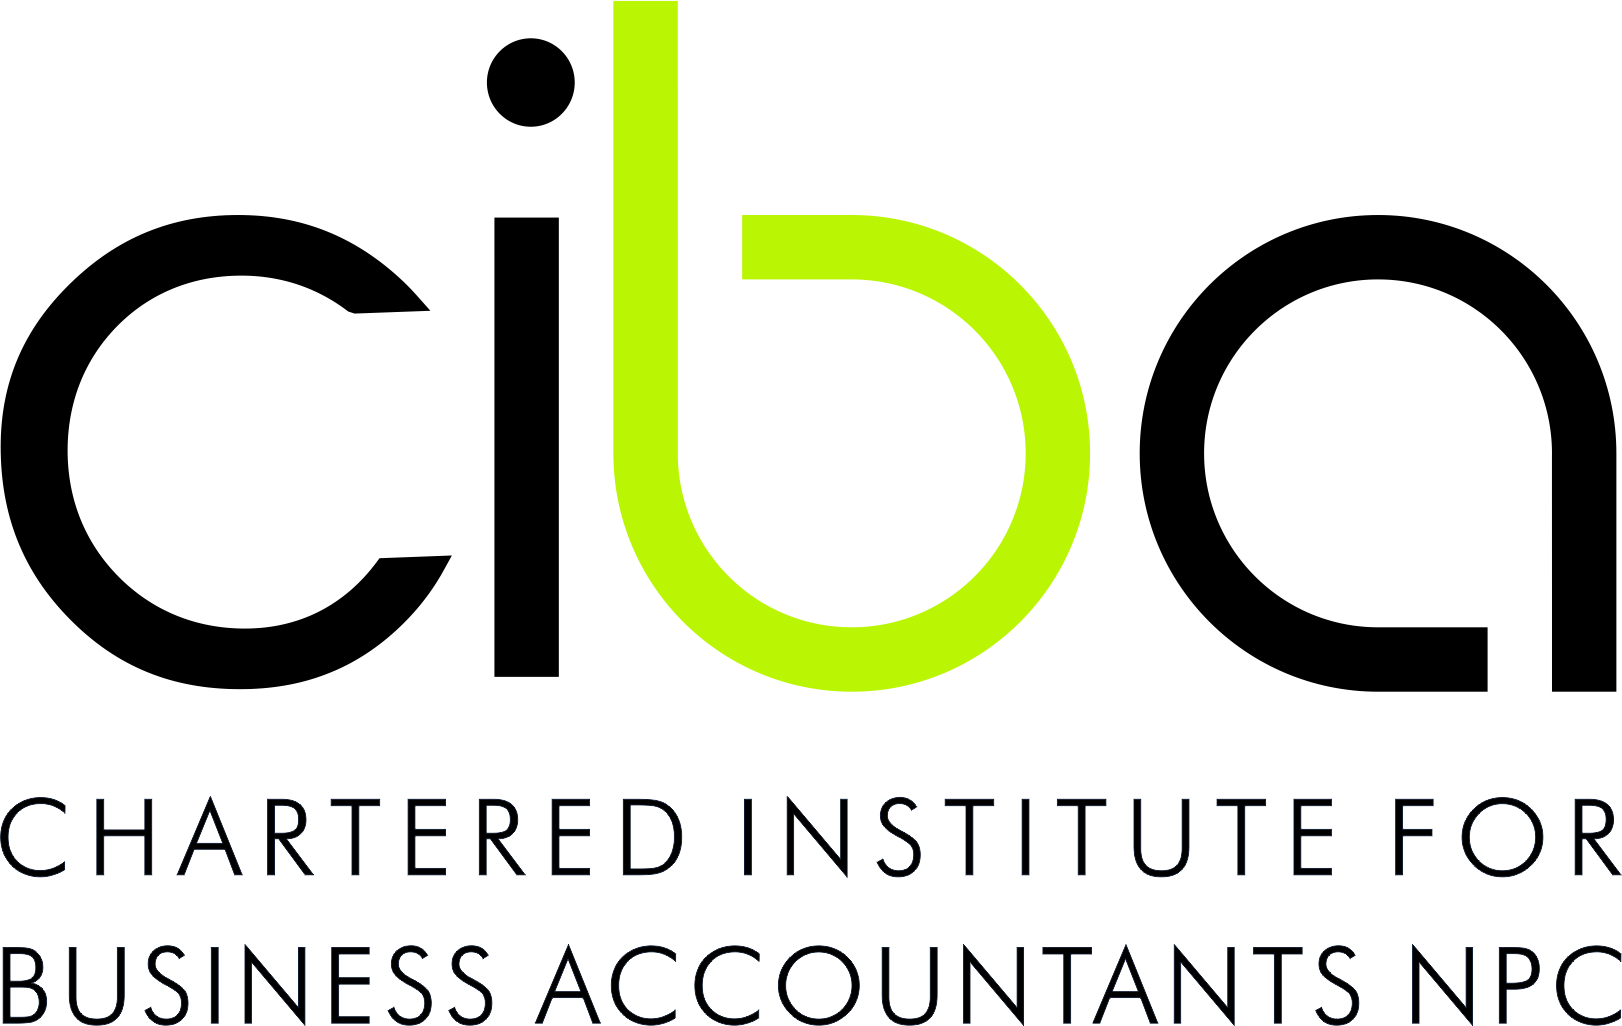 Chartered Institute for Business Accountants